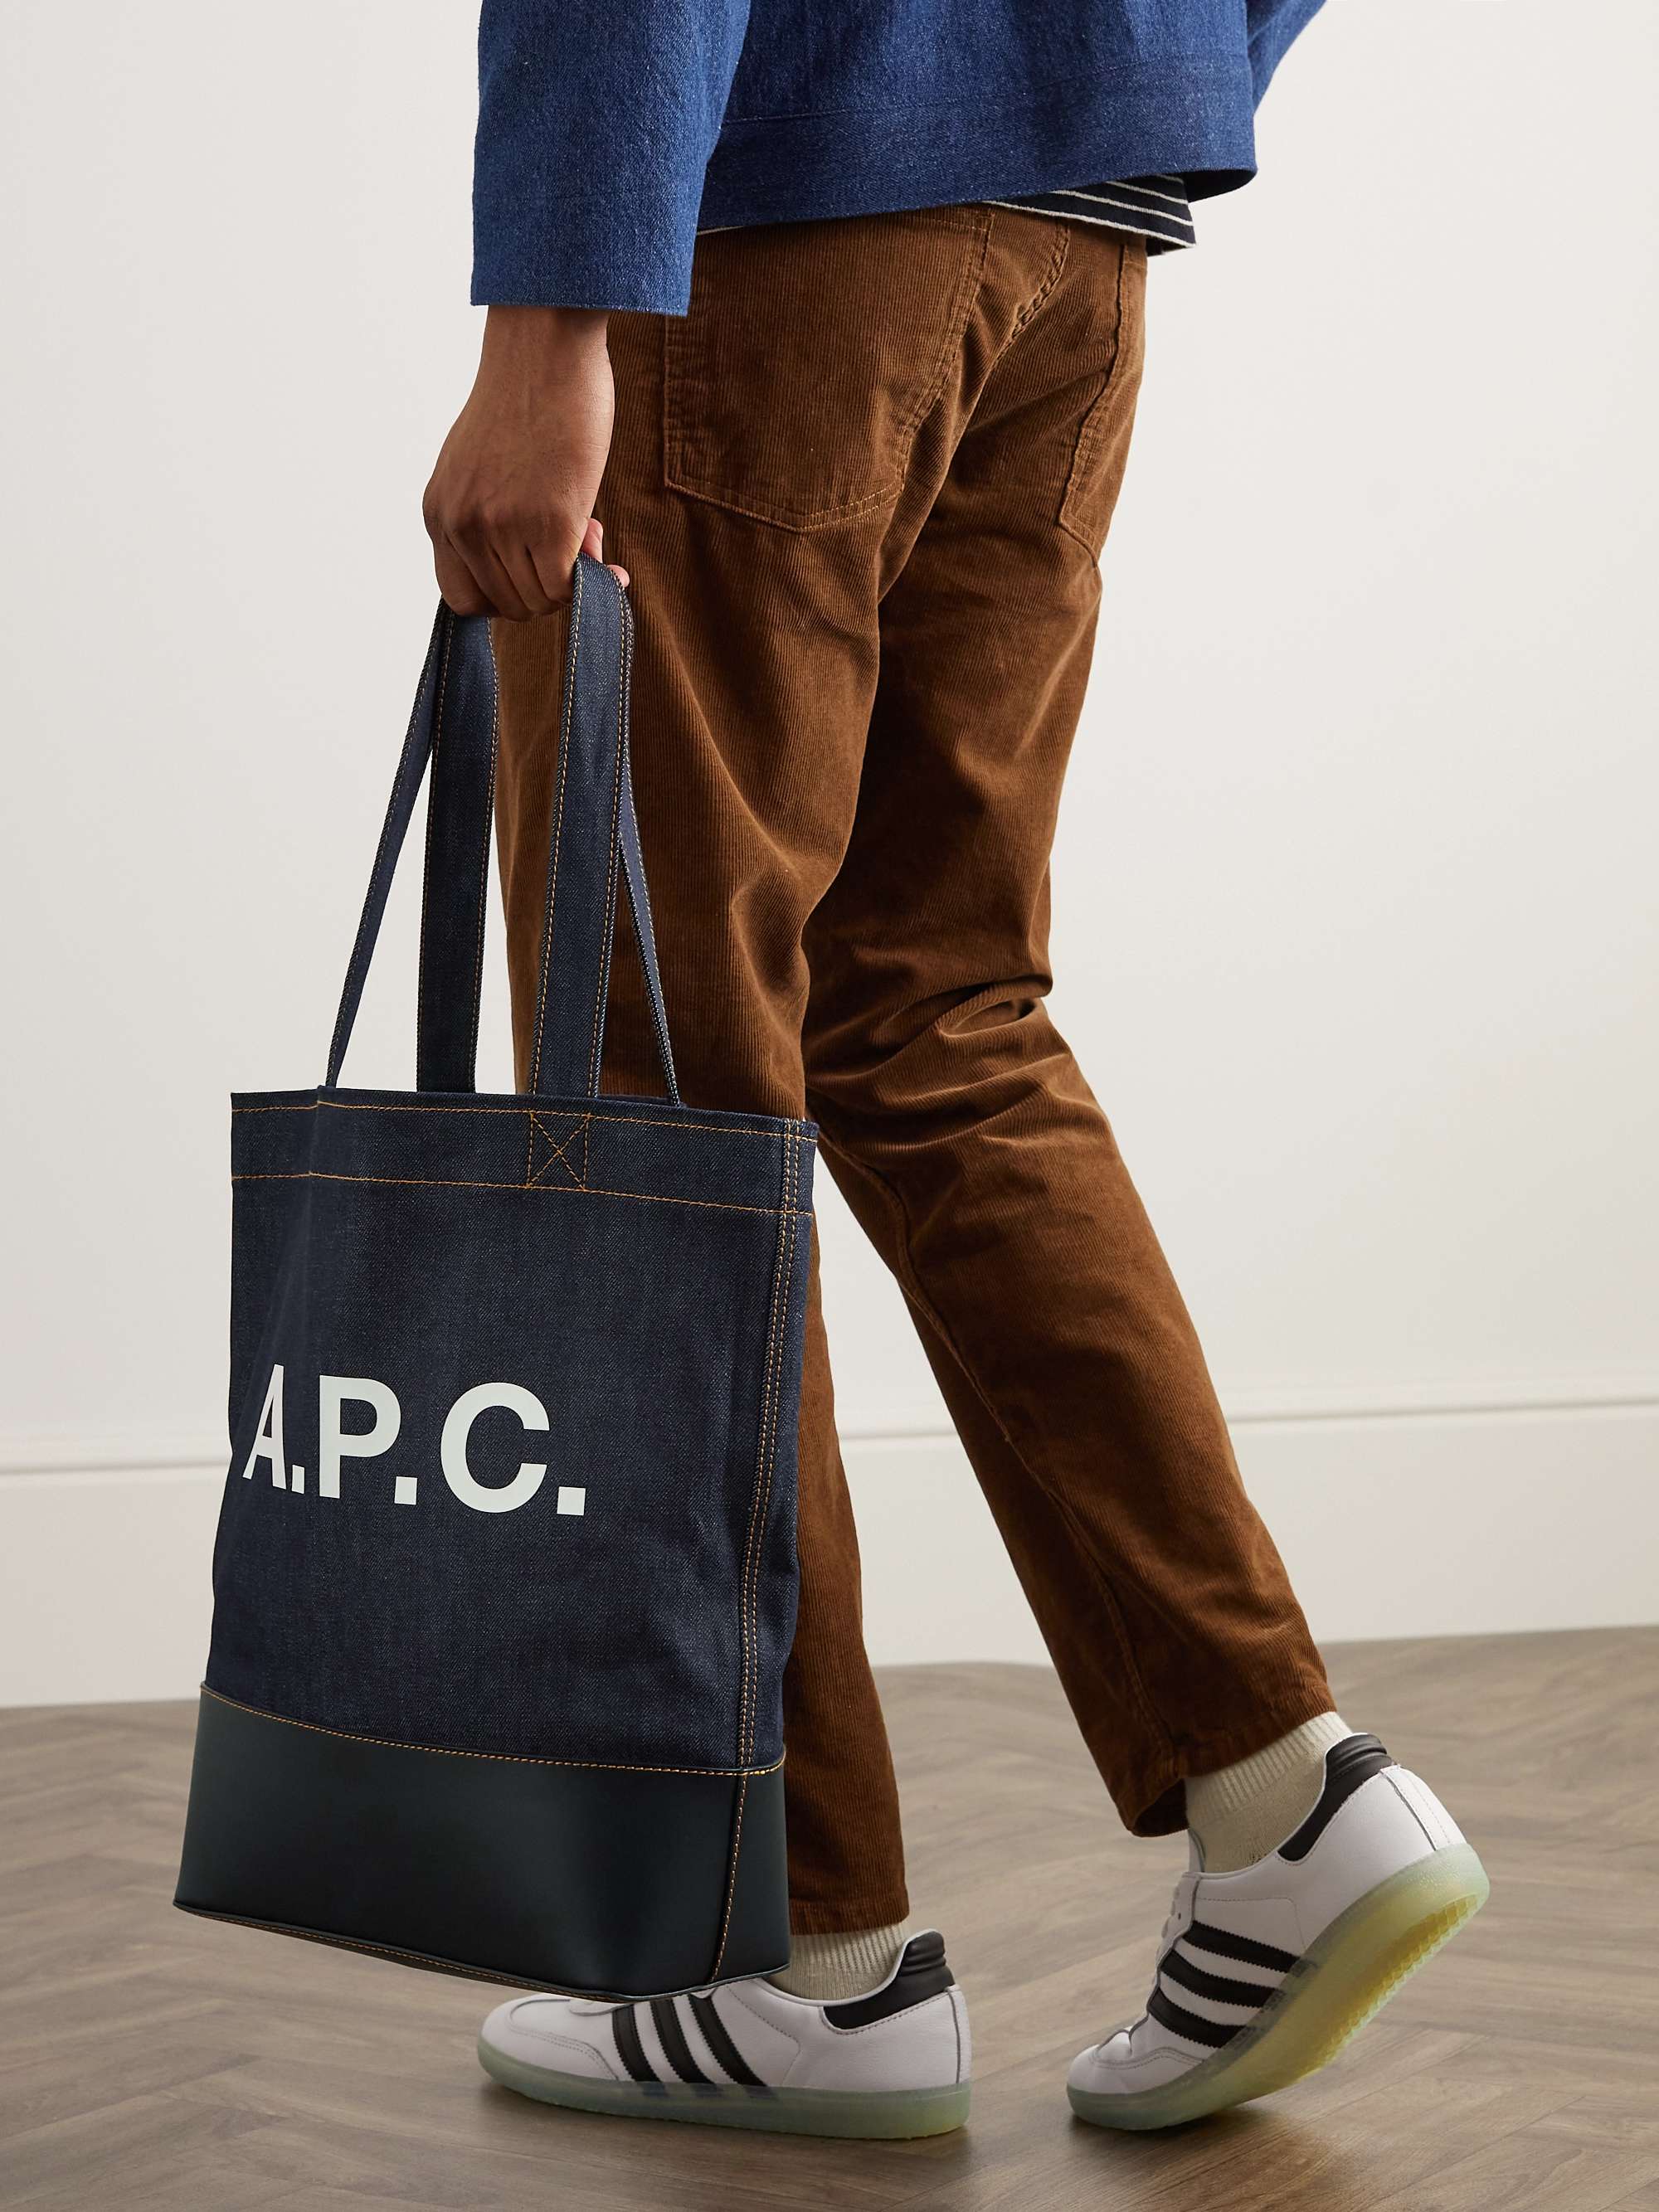 A.P.C. Axel Logo-Print Denim and Leather Tote Bag for Men | MR PORTER